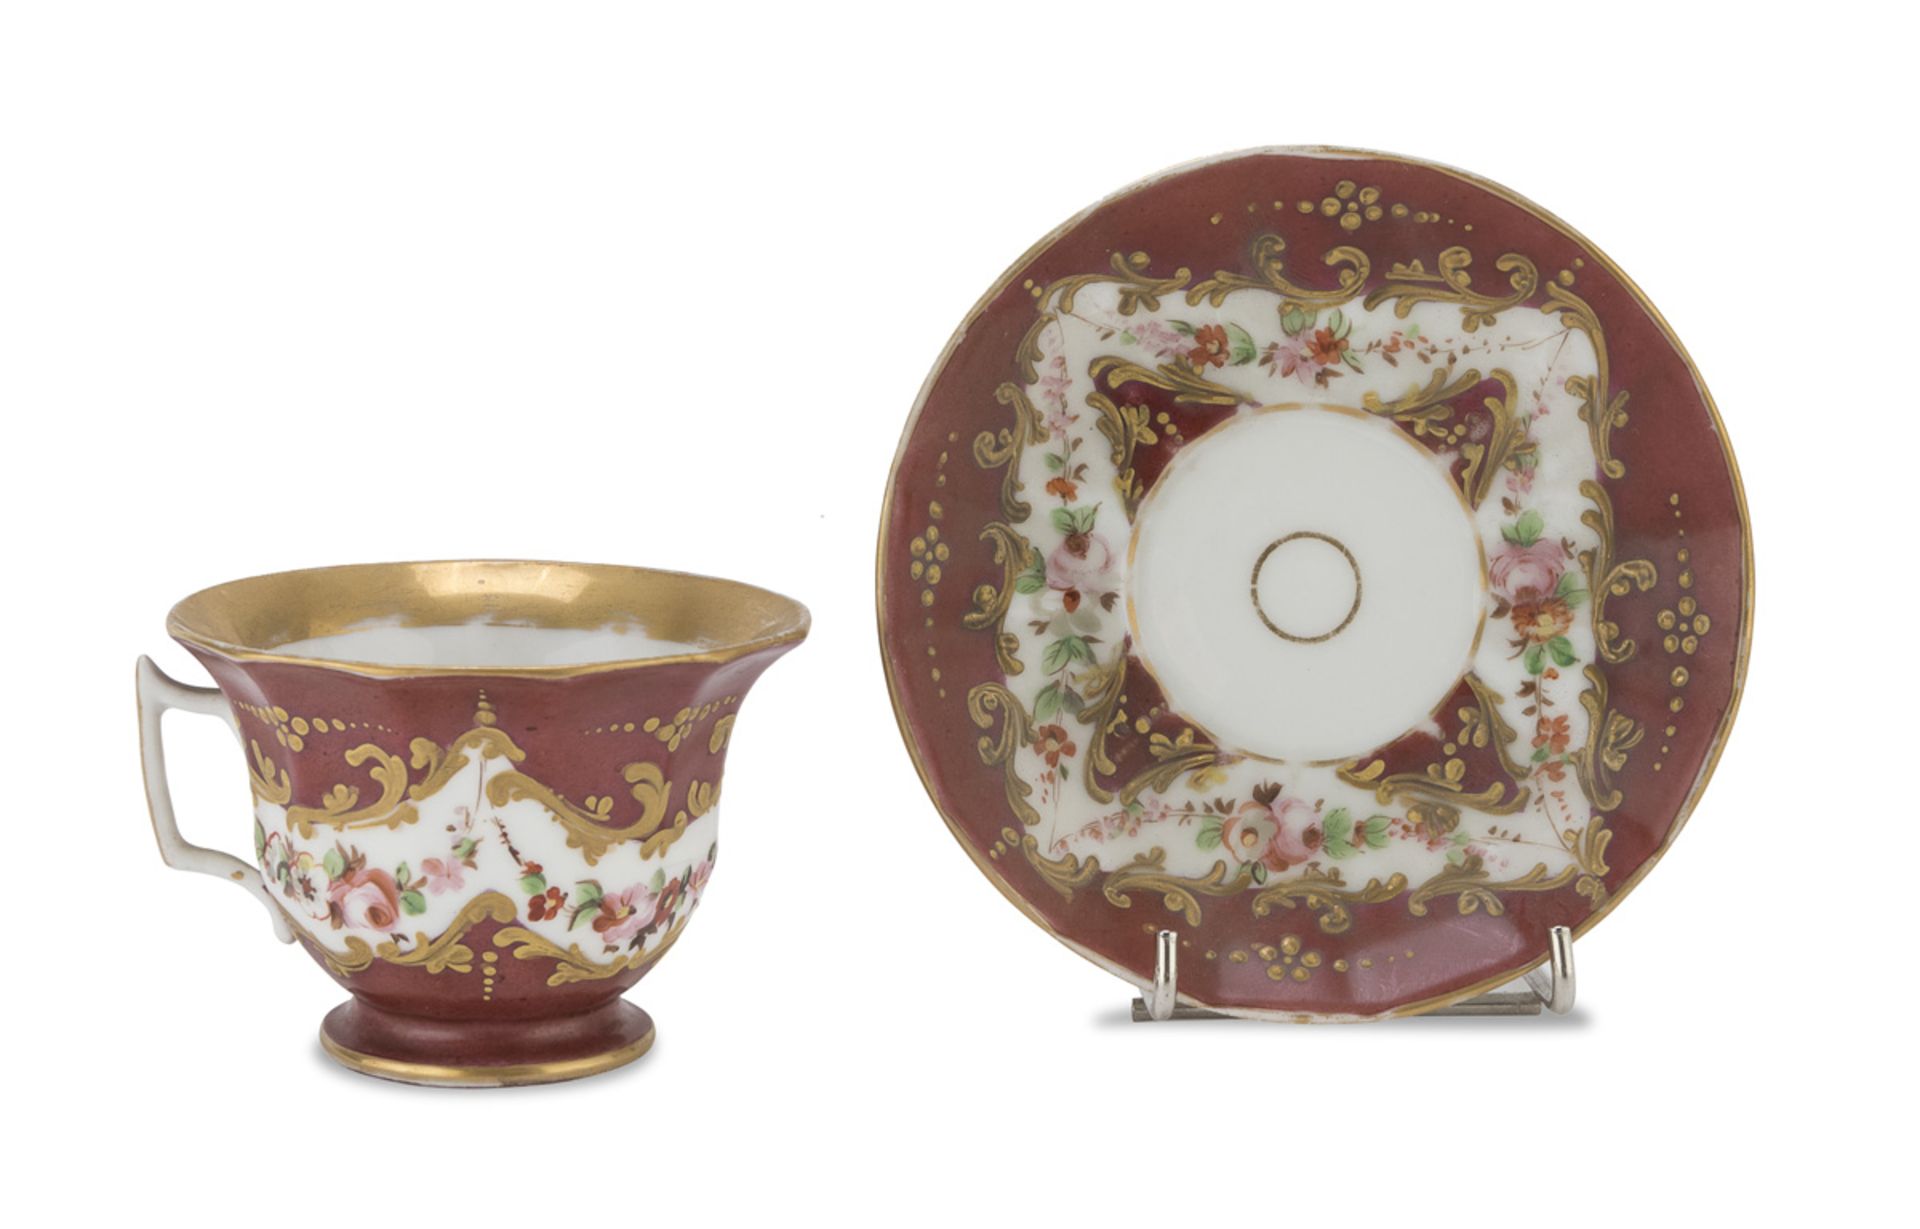 CUP AND SAUCER IN PORCELAIN 19TH CENTURY